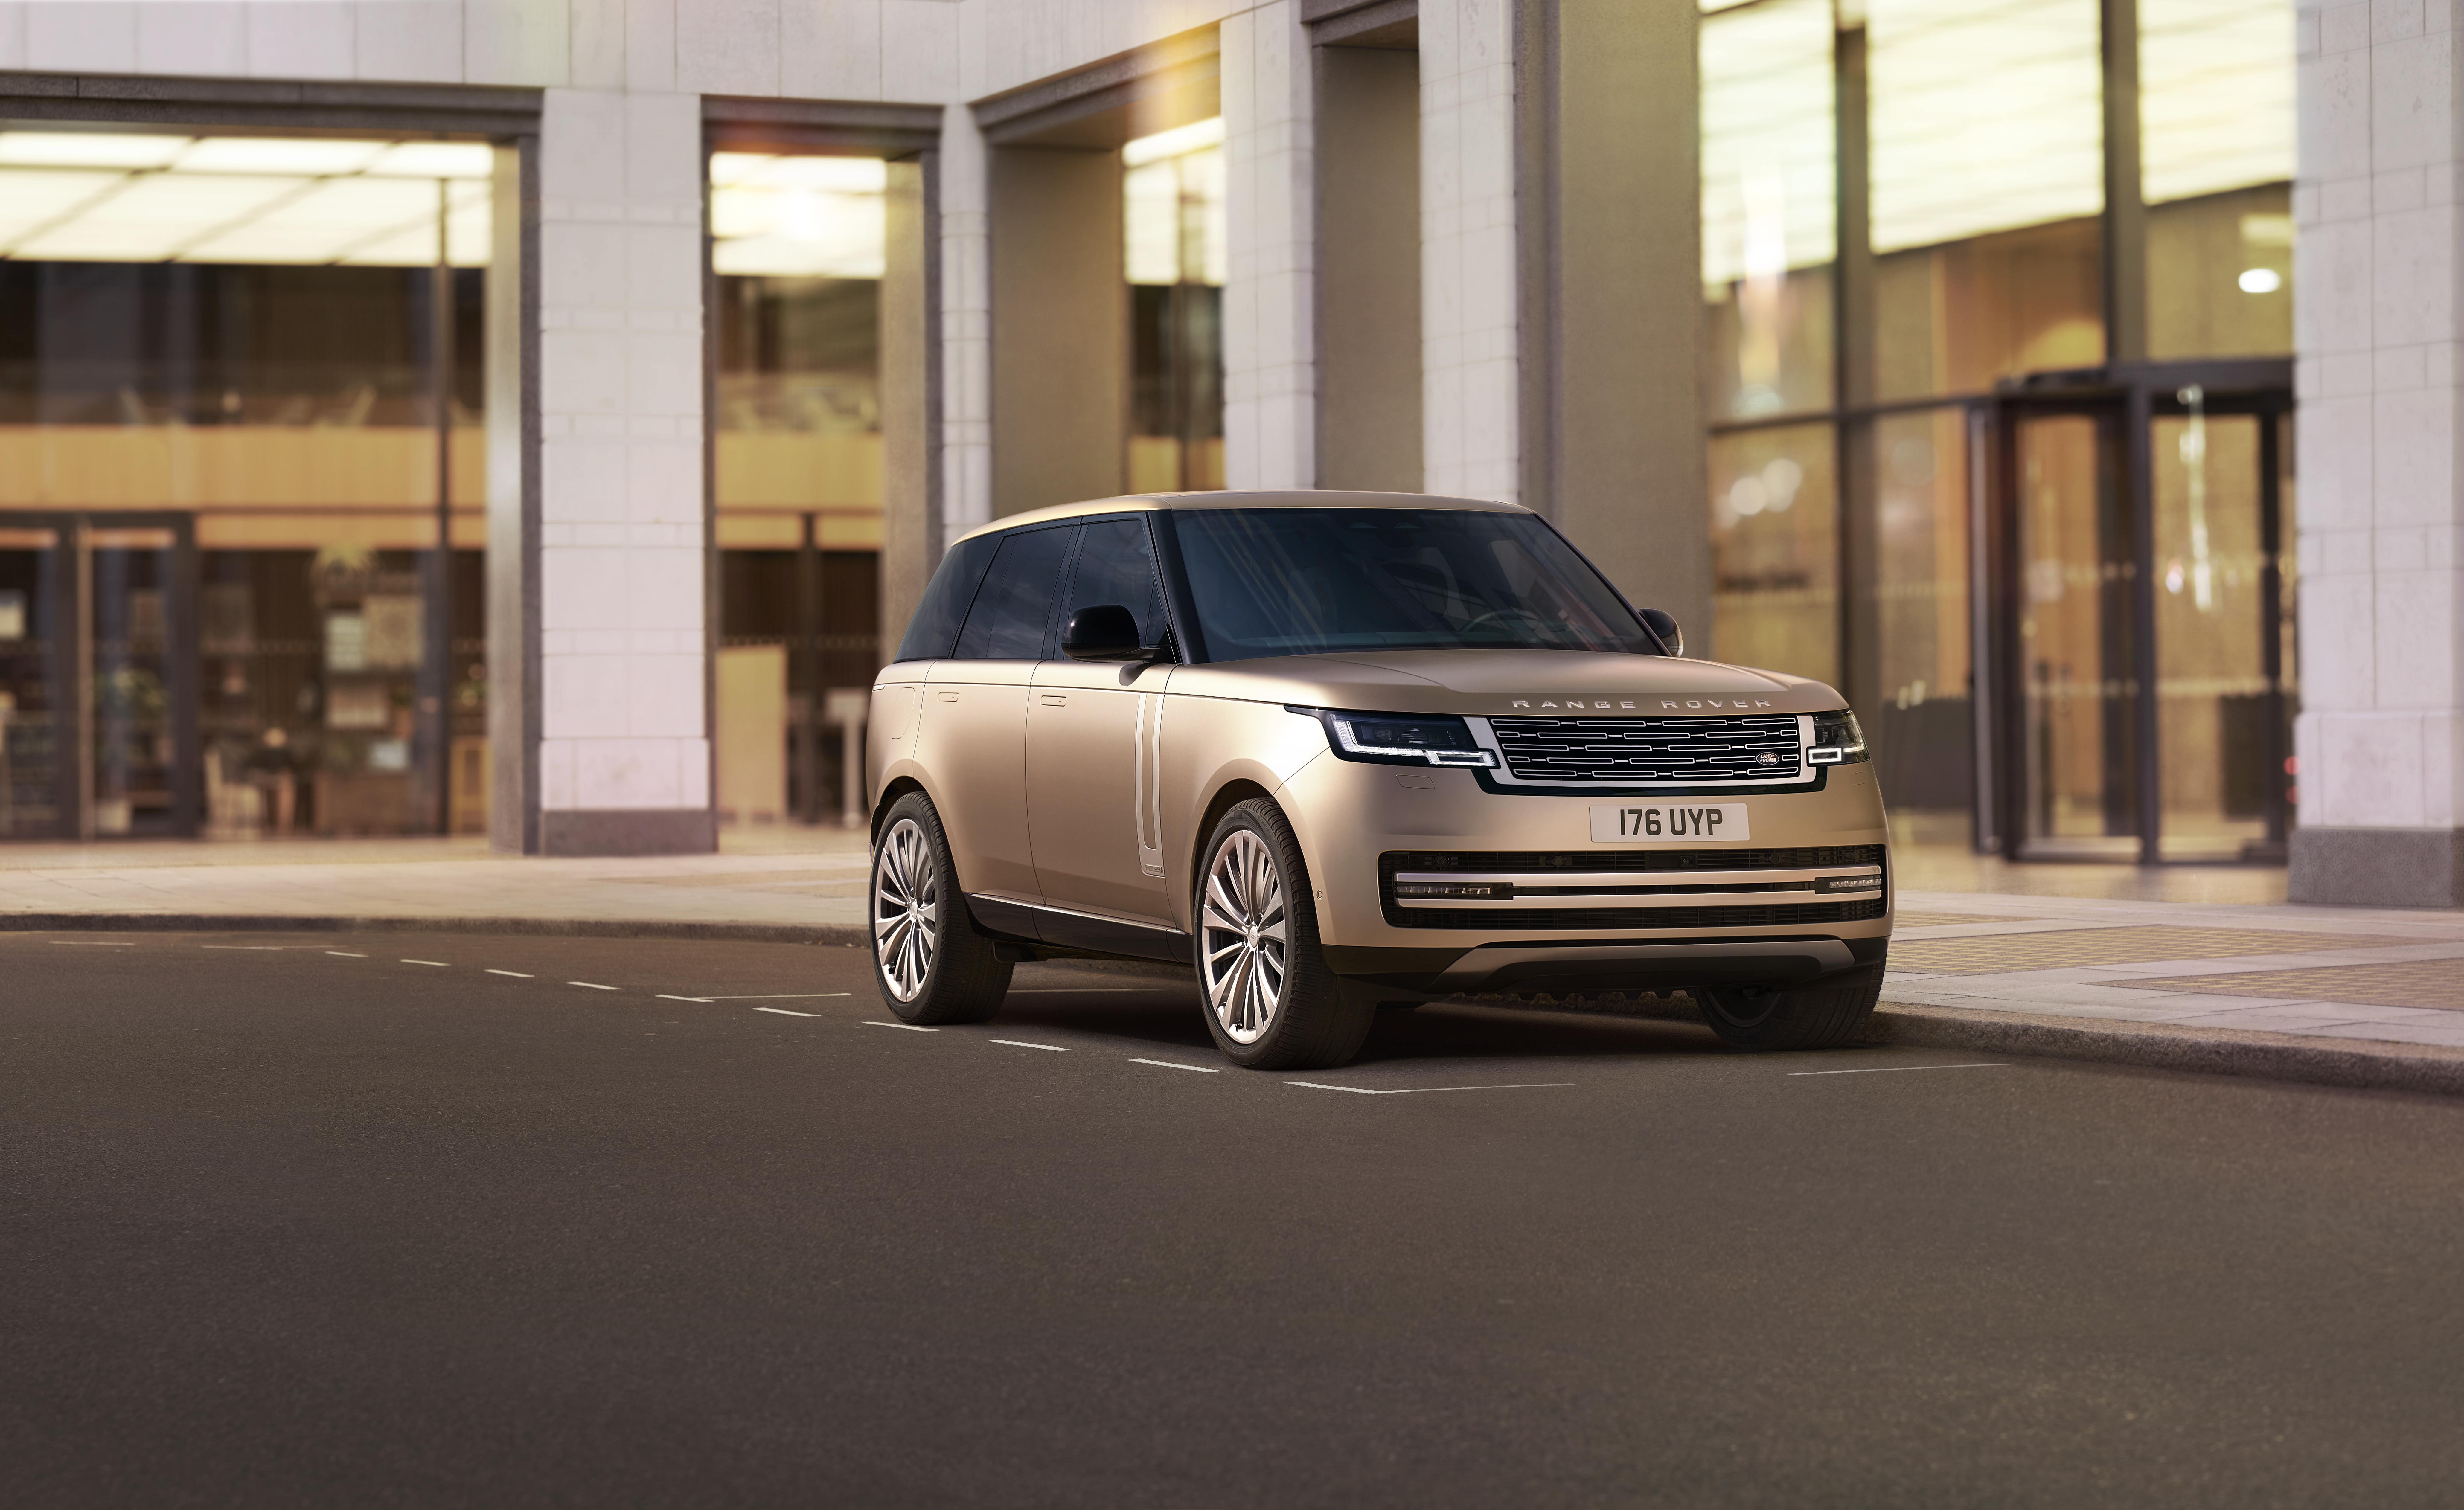 2022 Range Rover is an architectural powerhouse